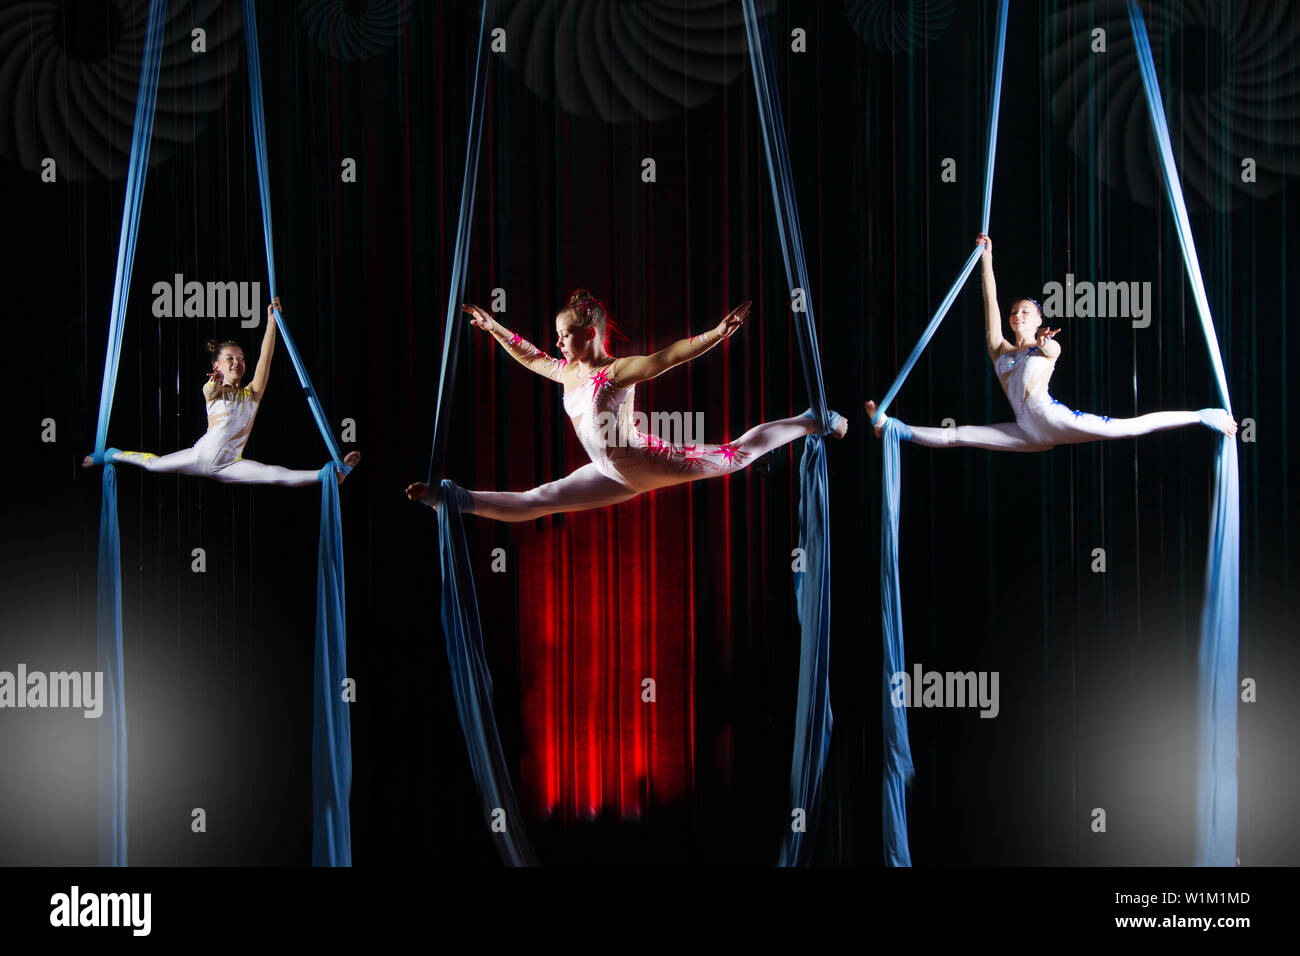 Circus Actress Acrobats Performance On Canvases Team Girls Perform Acrobatic Elements In The